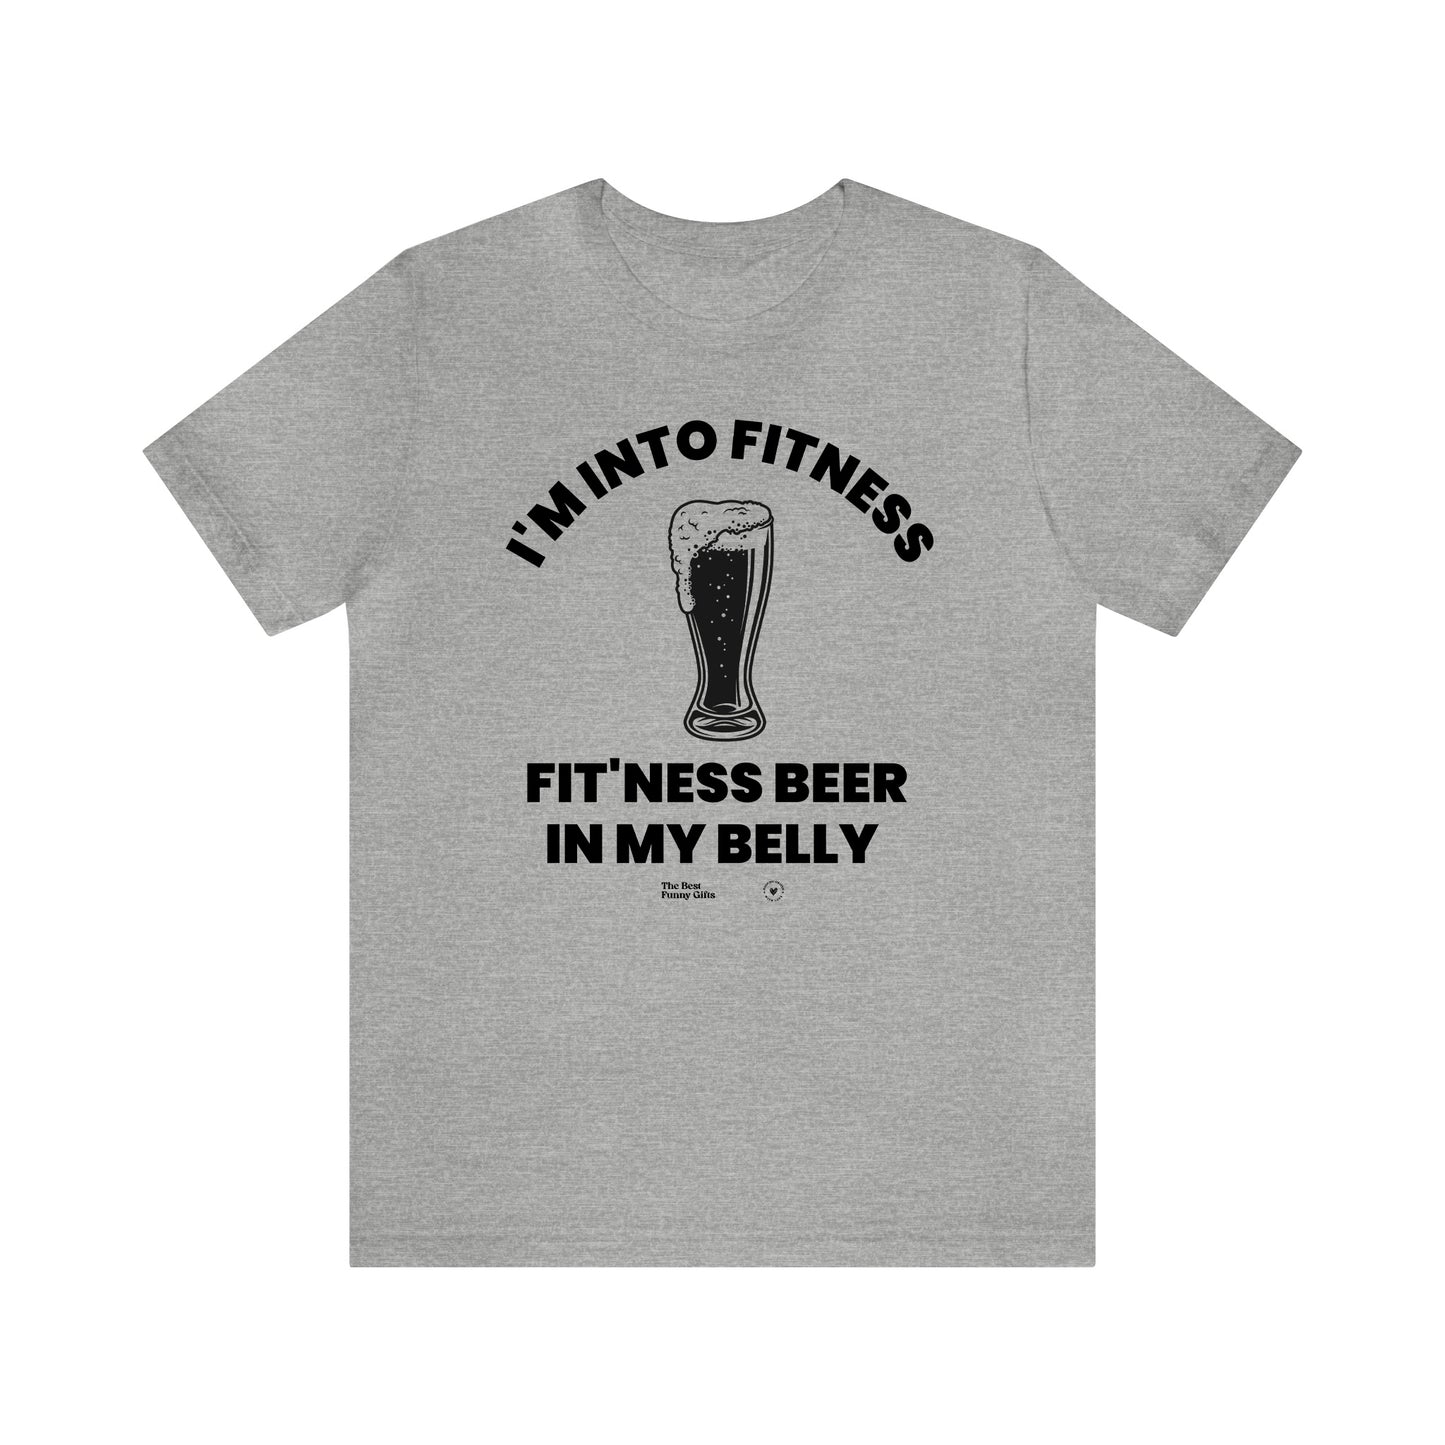 Mens T Shirts - I'm Into Fitness Fit'ness Beer in My Belly - Funny Men T Shirts